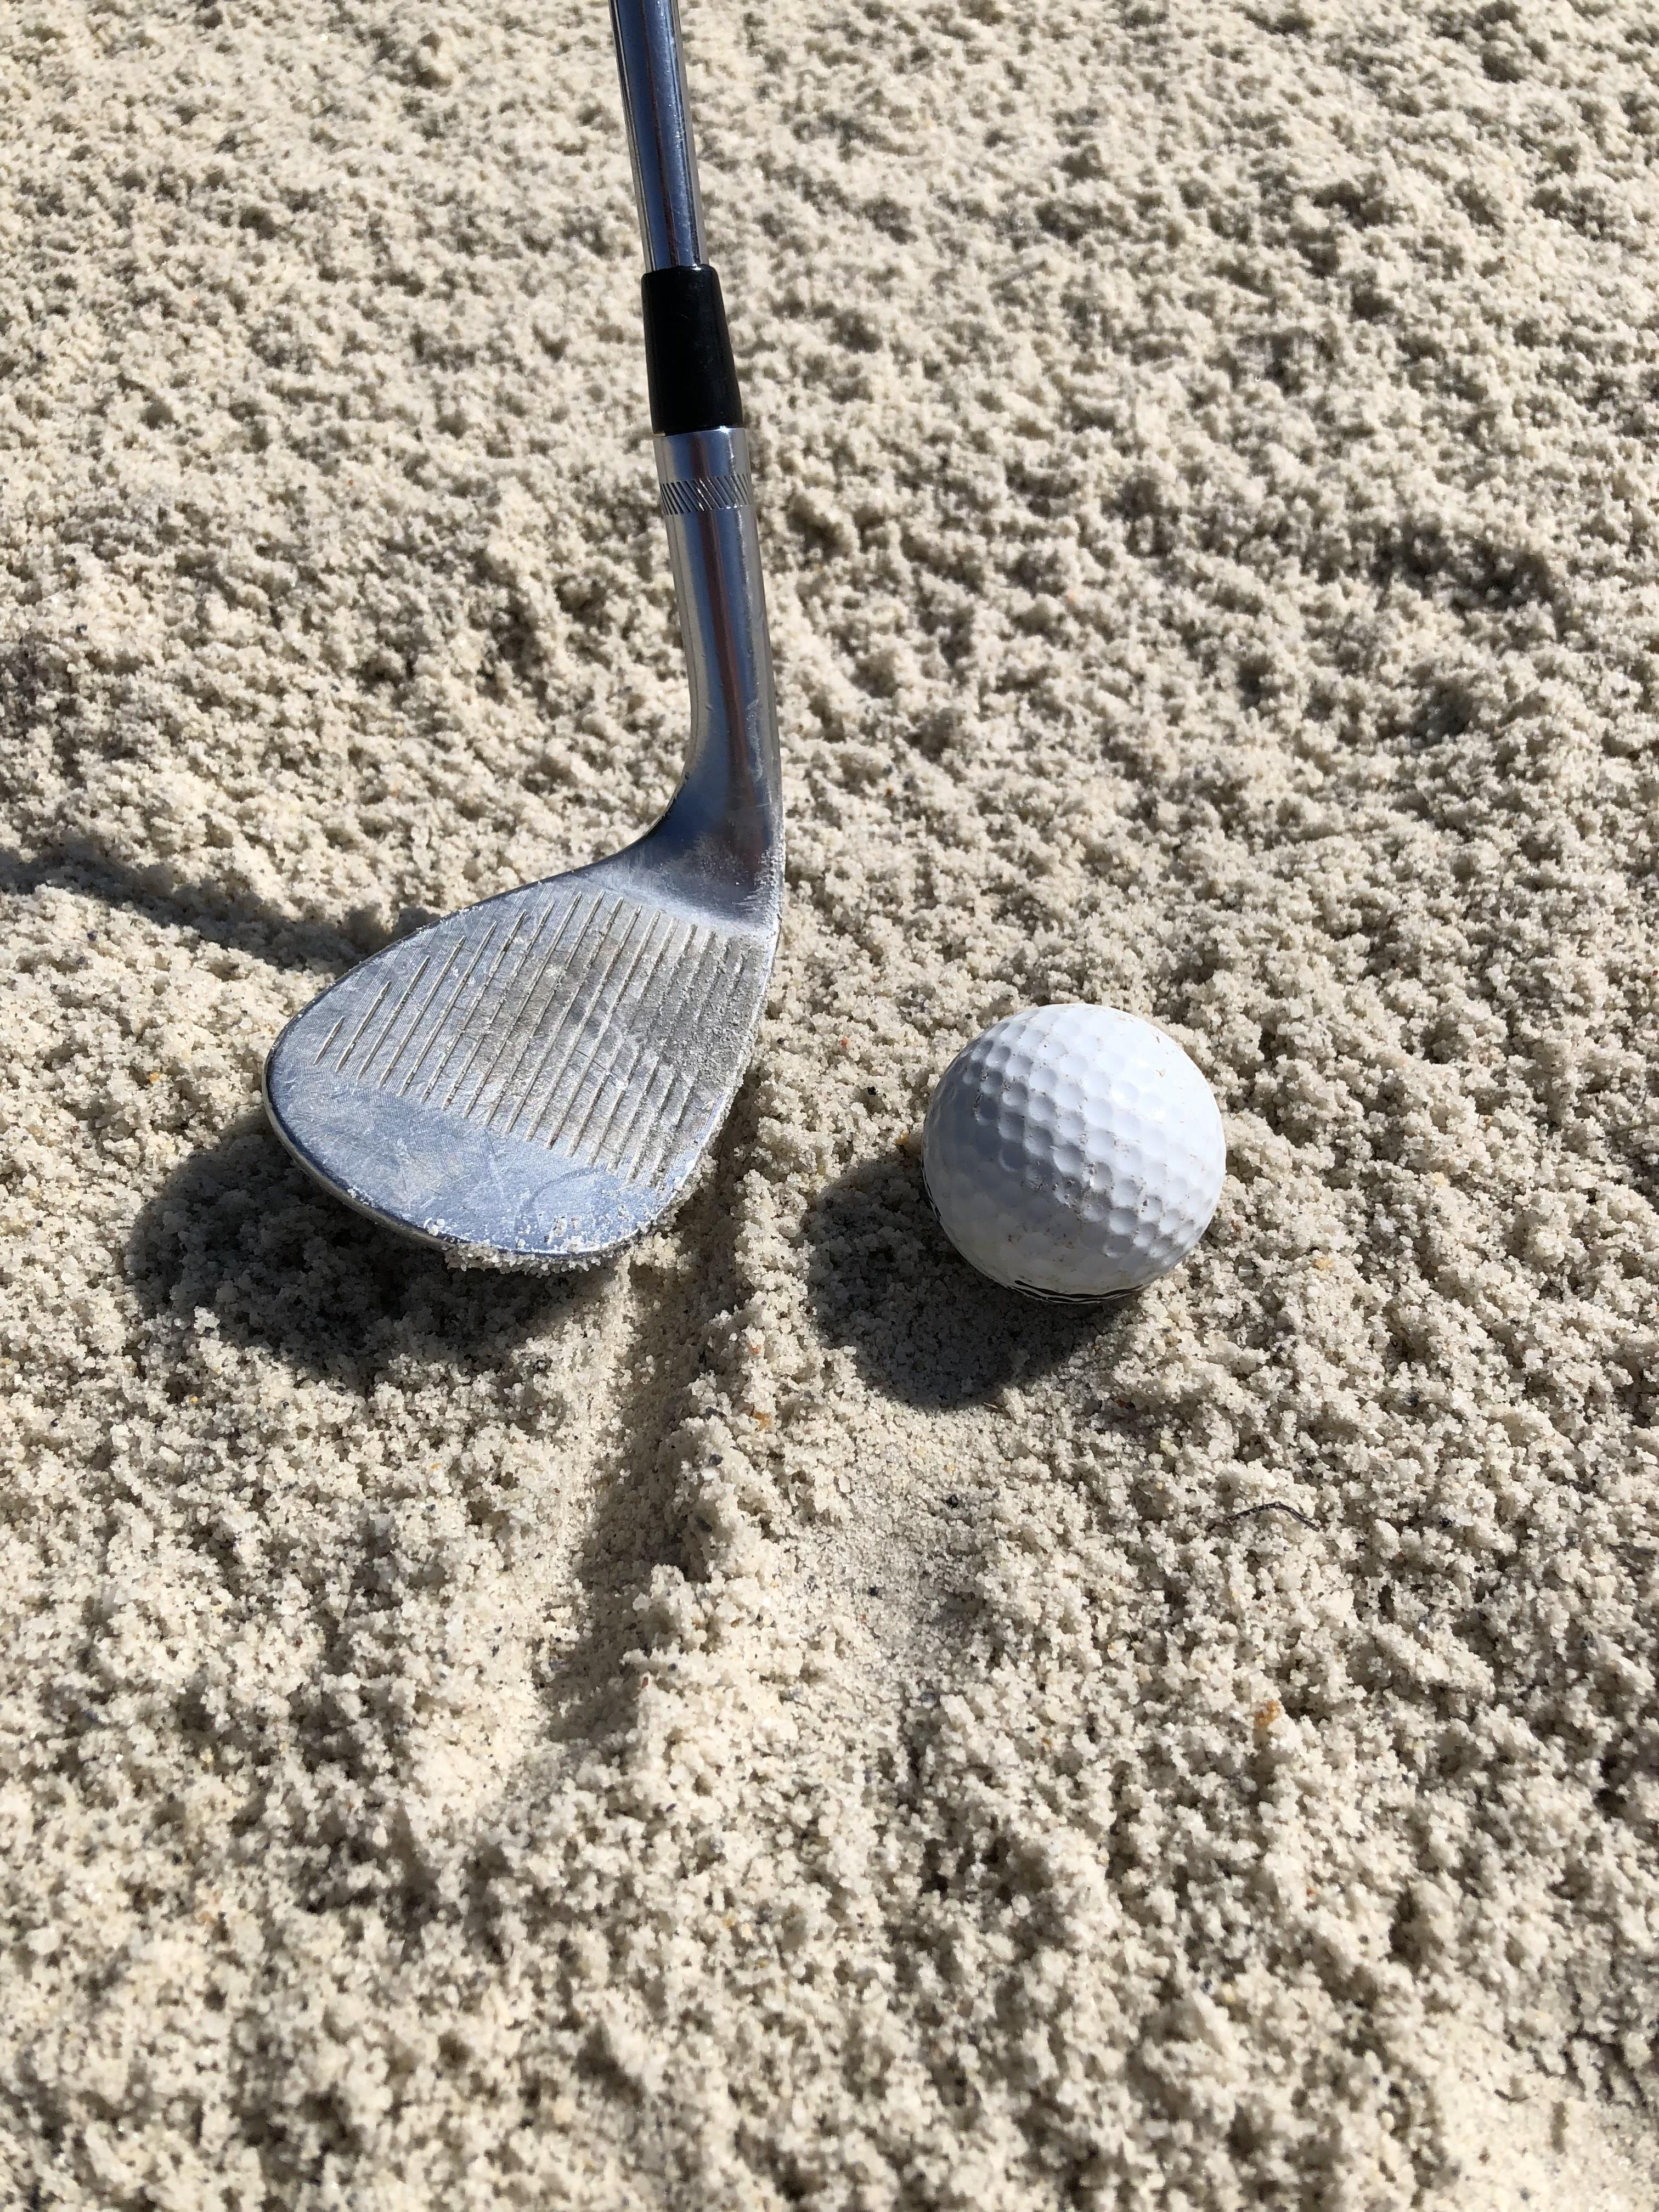 How To Hit a Bunker Shot - The Scoop